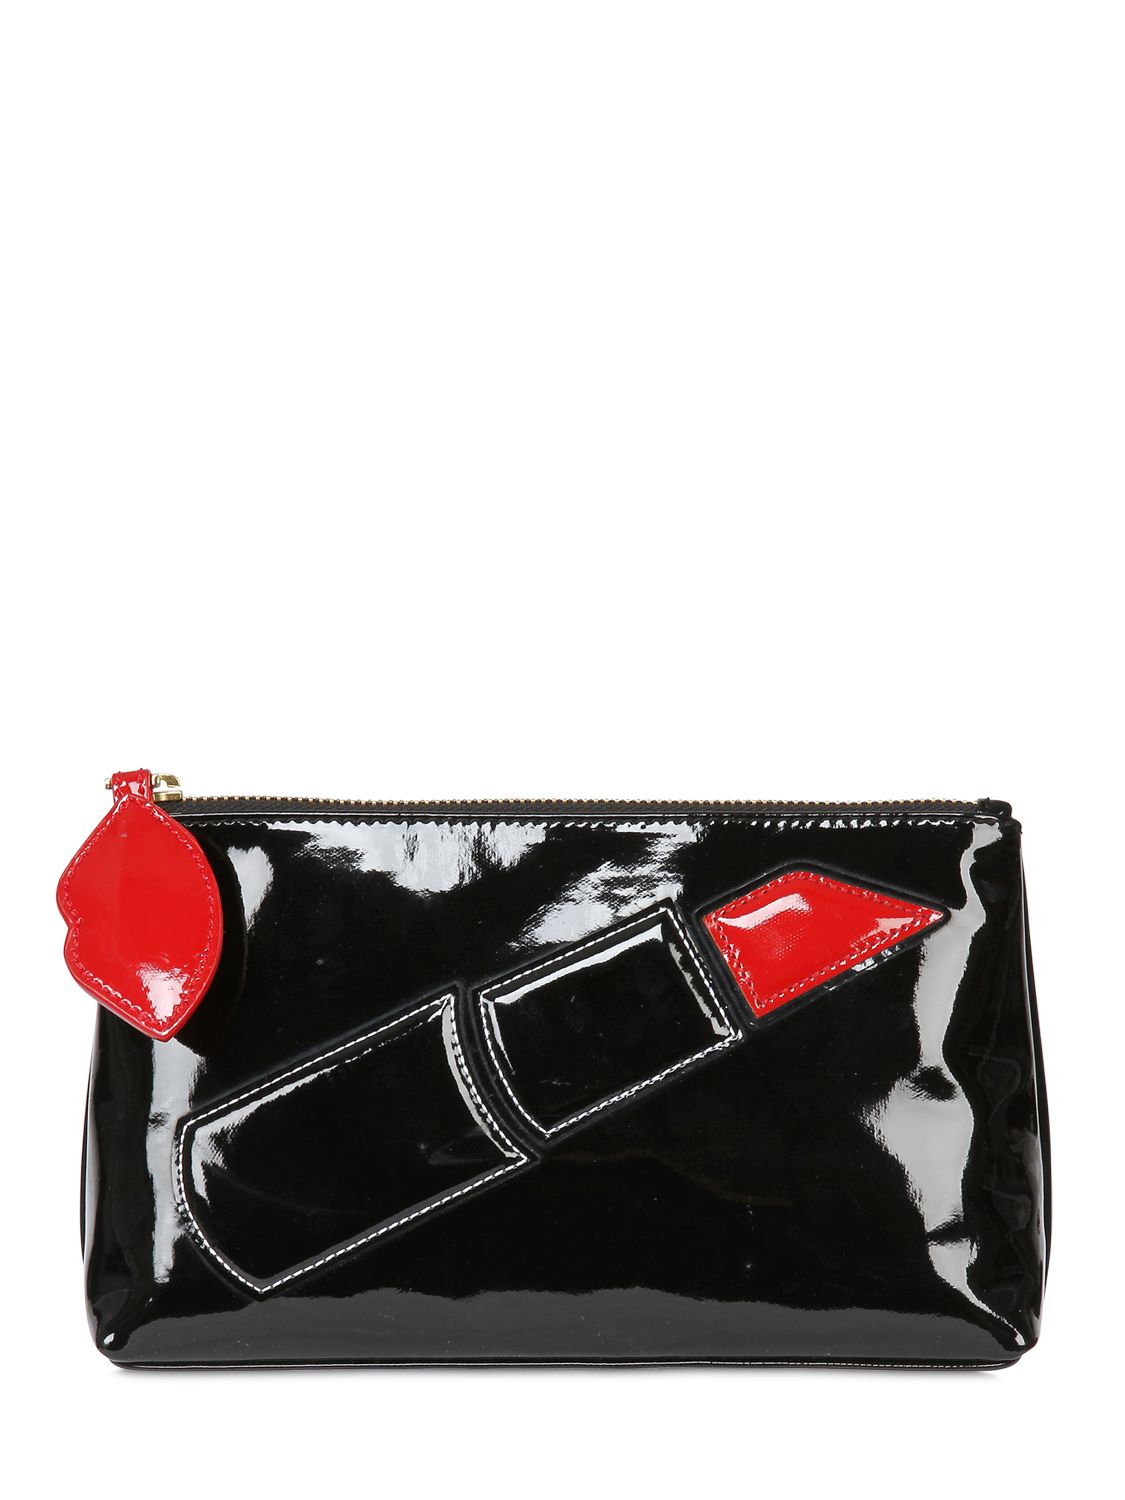 Lyst - Lulu Guinness Lipstick Stitching Patent Leather Bag in Black